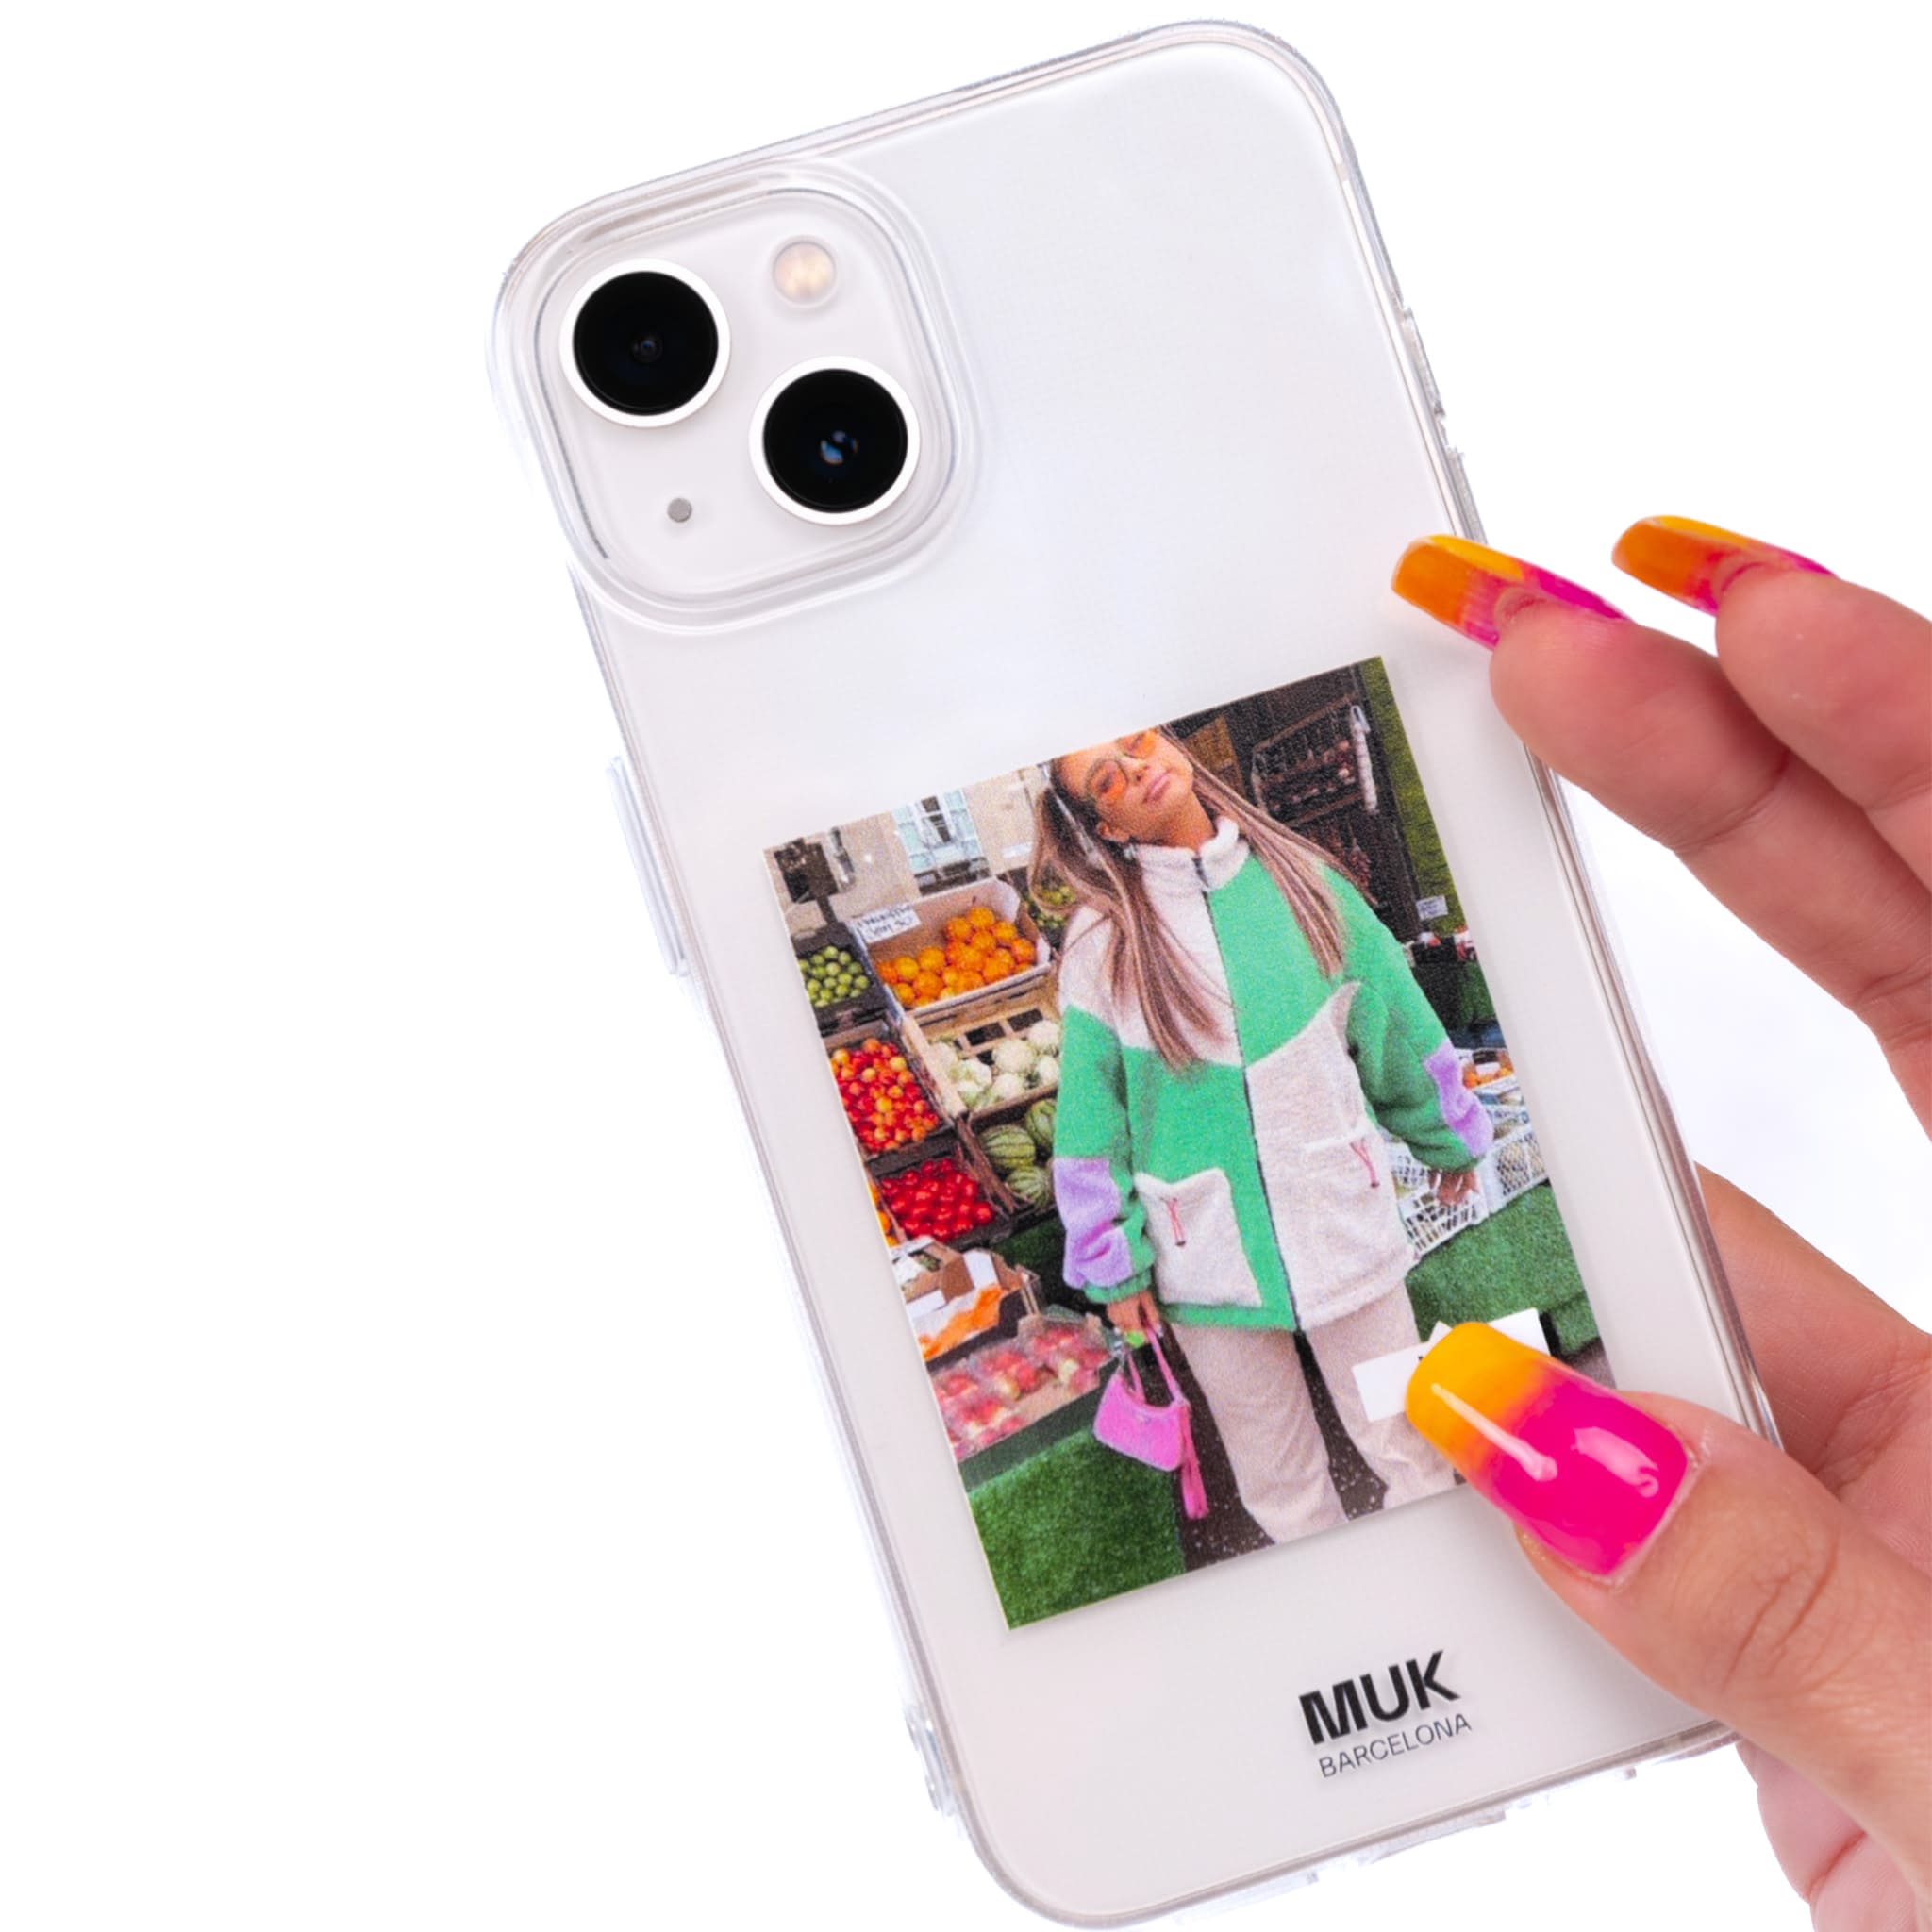 Personalized photo clear Phone Case with customizable label.
